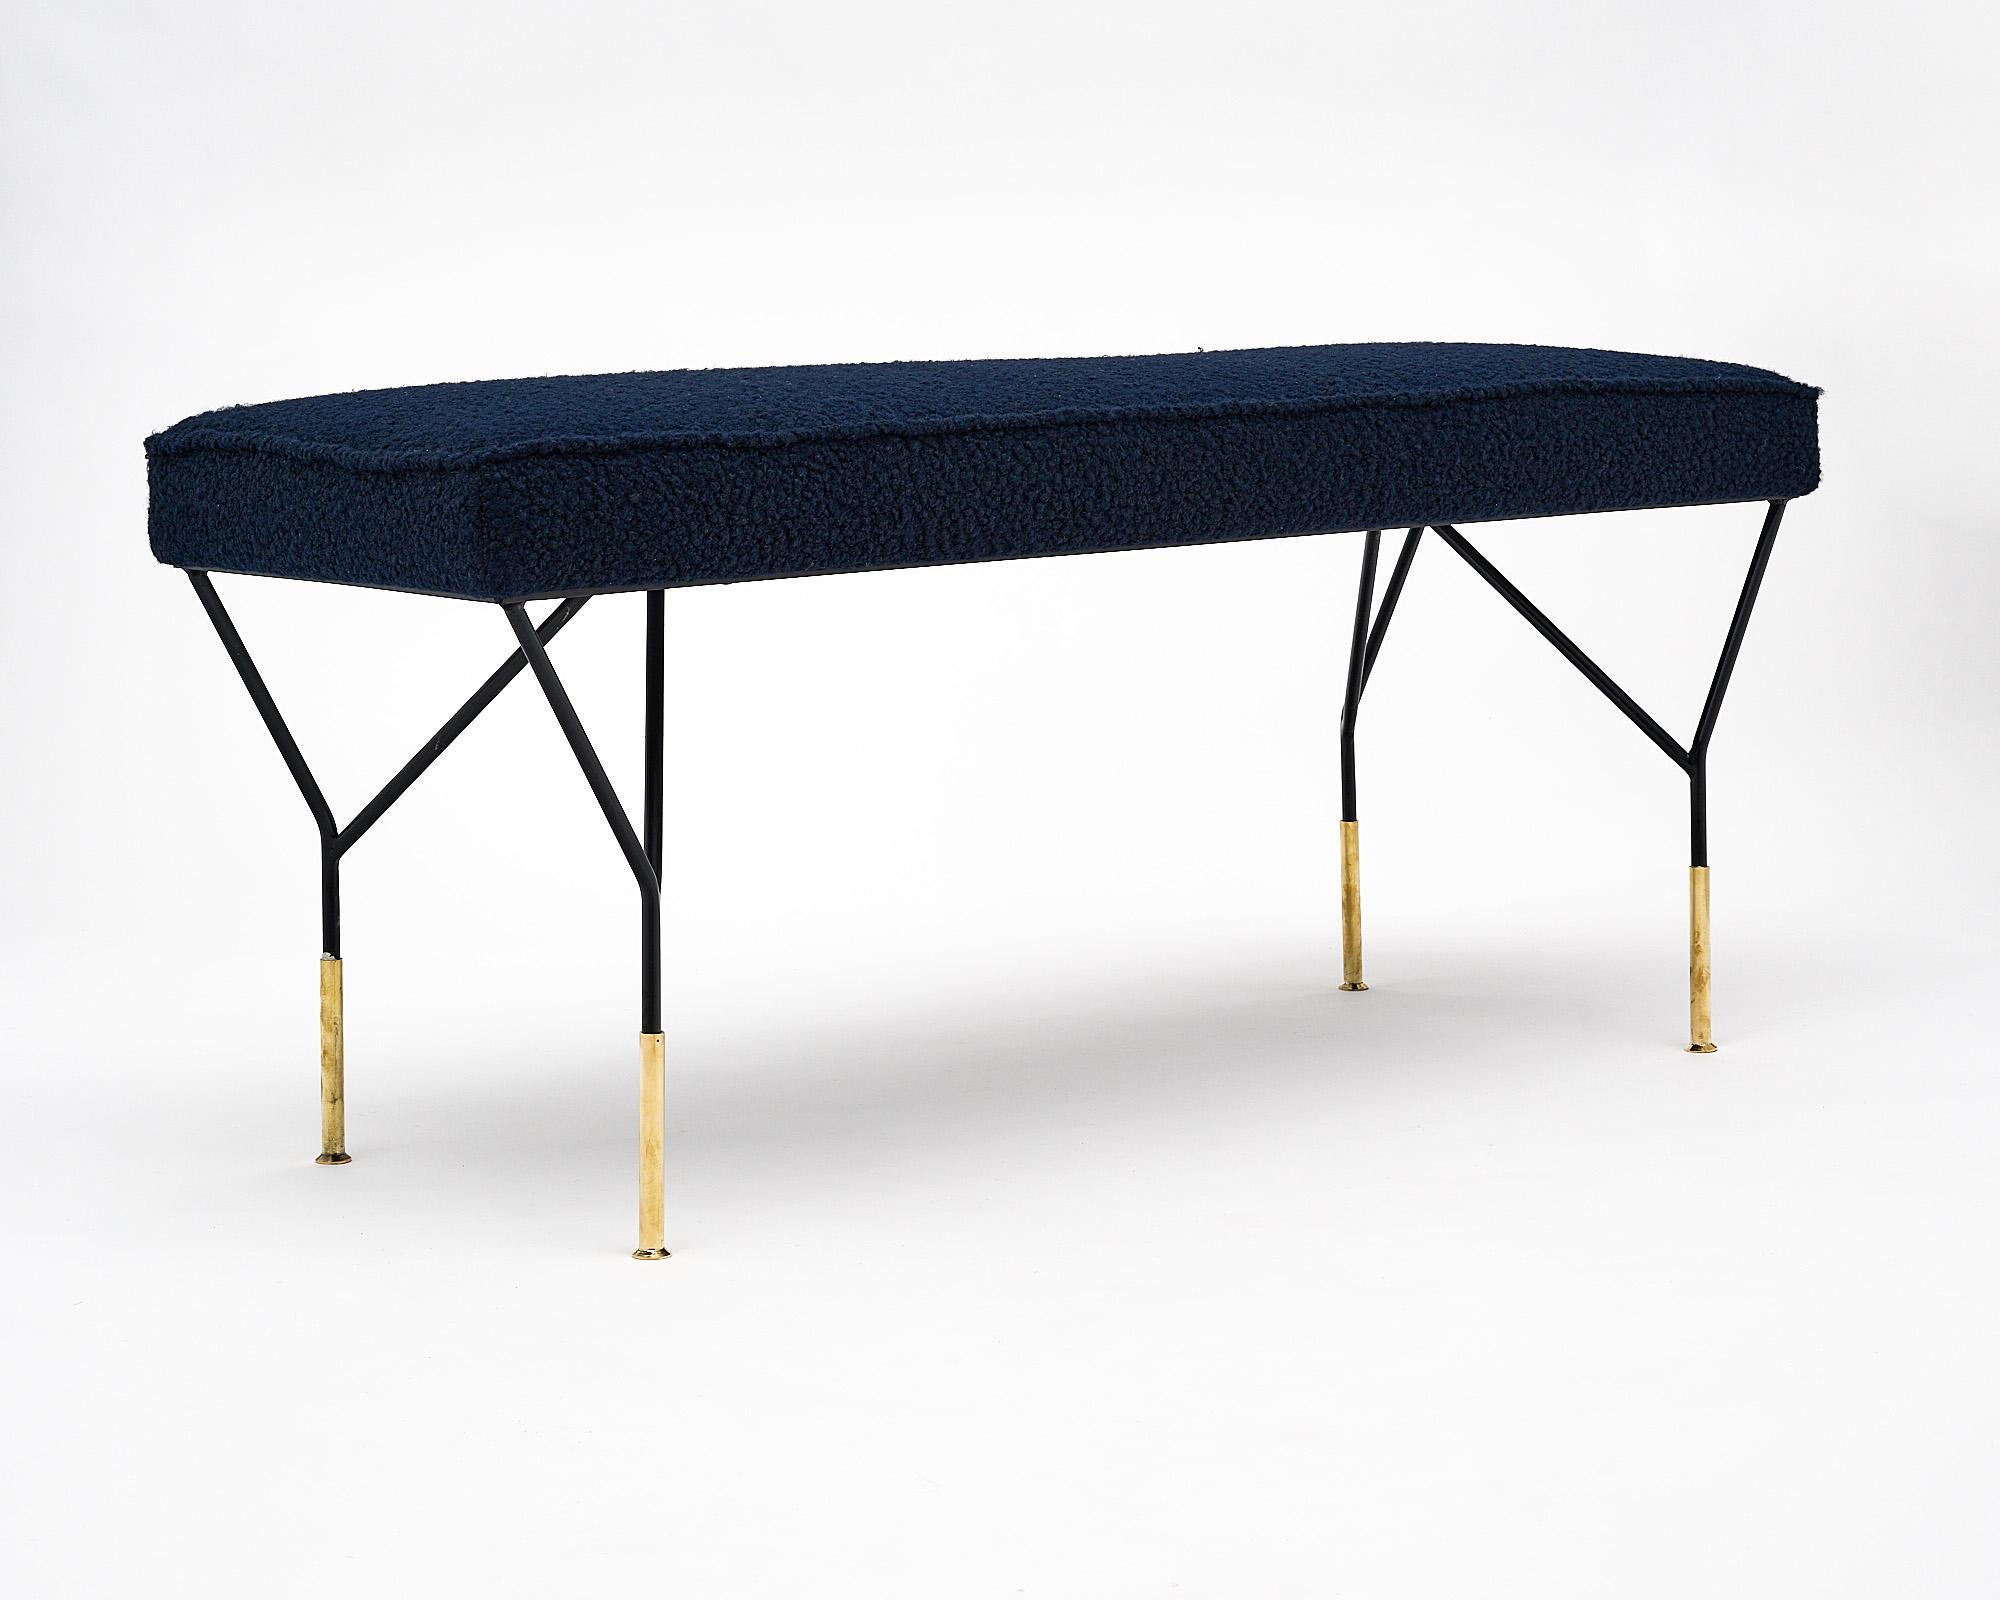 Pair of Italian benches with black lacquered steel and brass legs. New upholstery done in a navy blue wool blend.